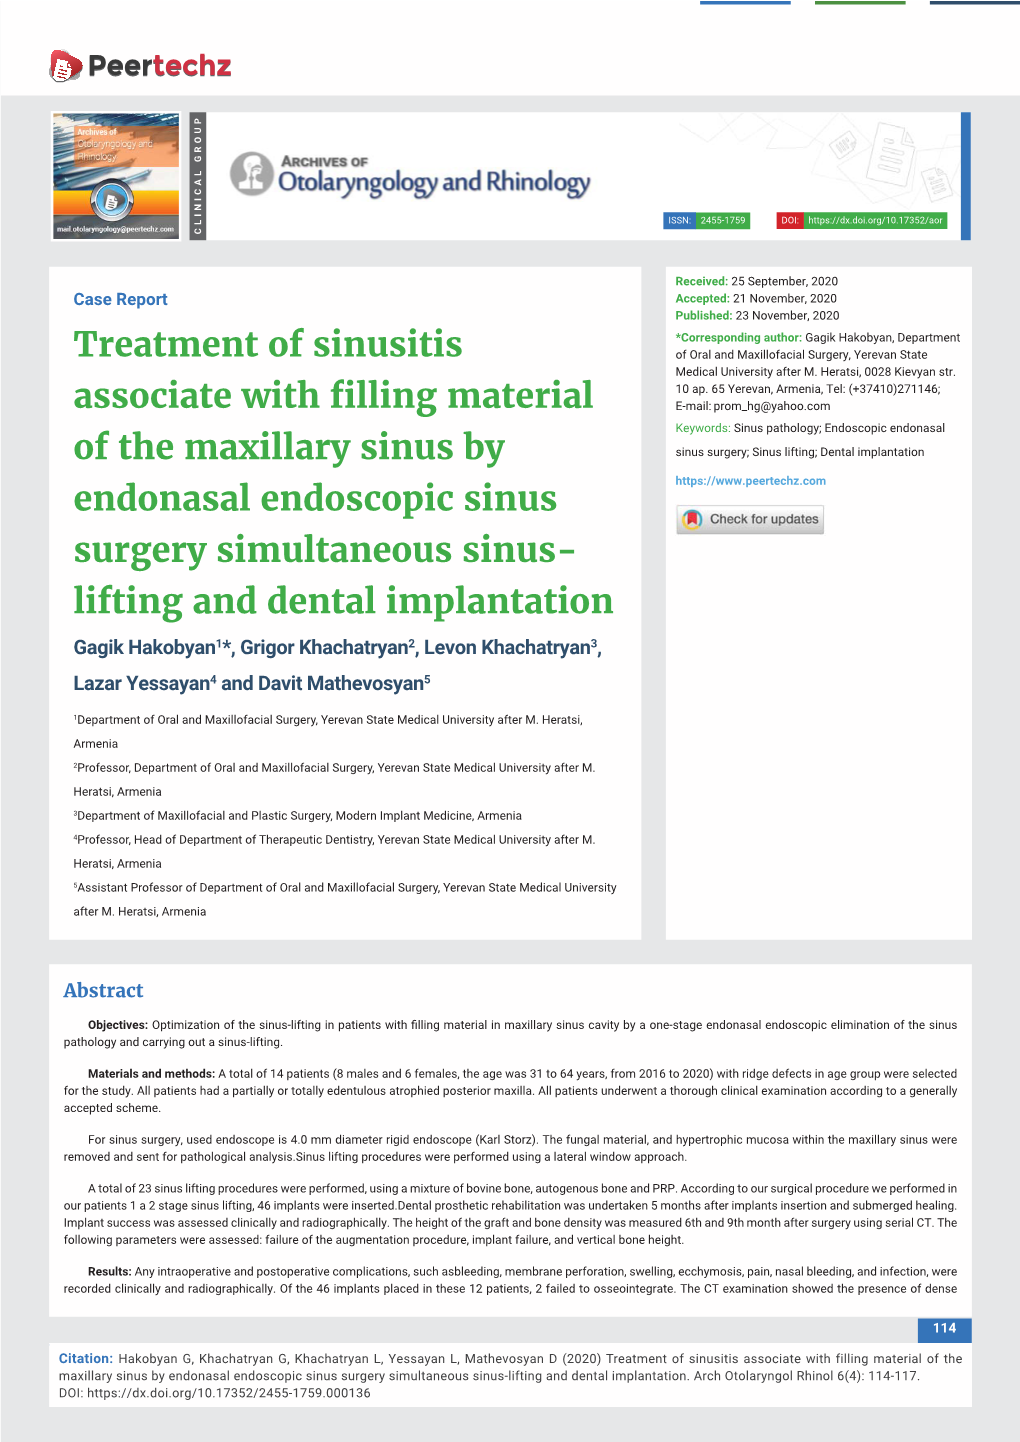 Treatment of Sinusitis Associate with Filling Material of the Maxillary Sinus by Endonasal Endoscopic Sinus Surgery Simultaneous Sinus-Lifting and Dental Implantation